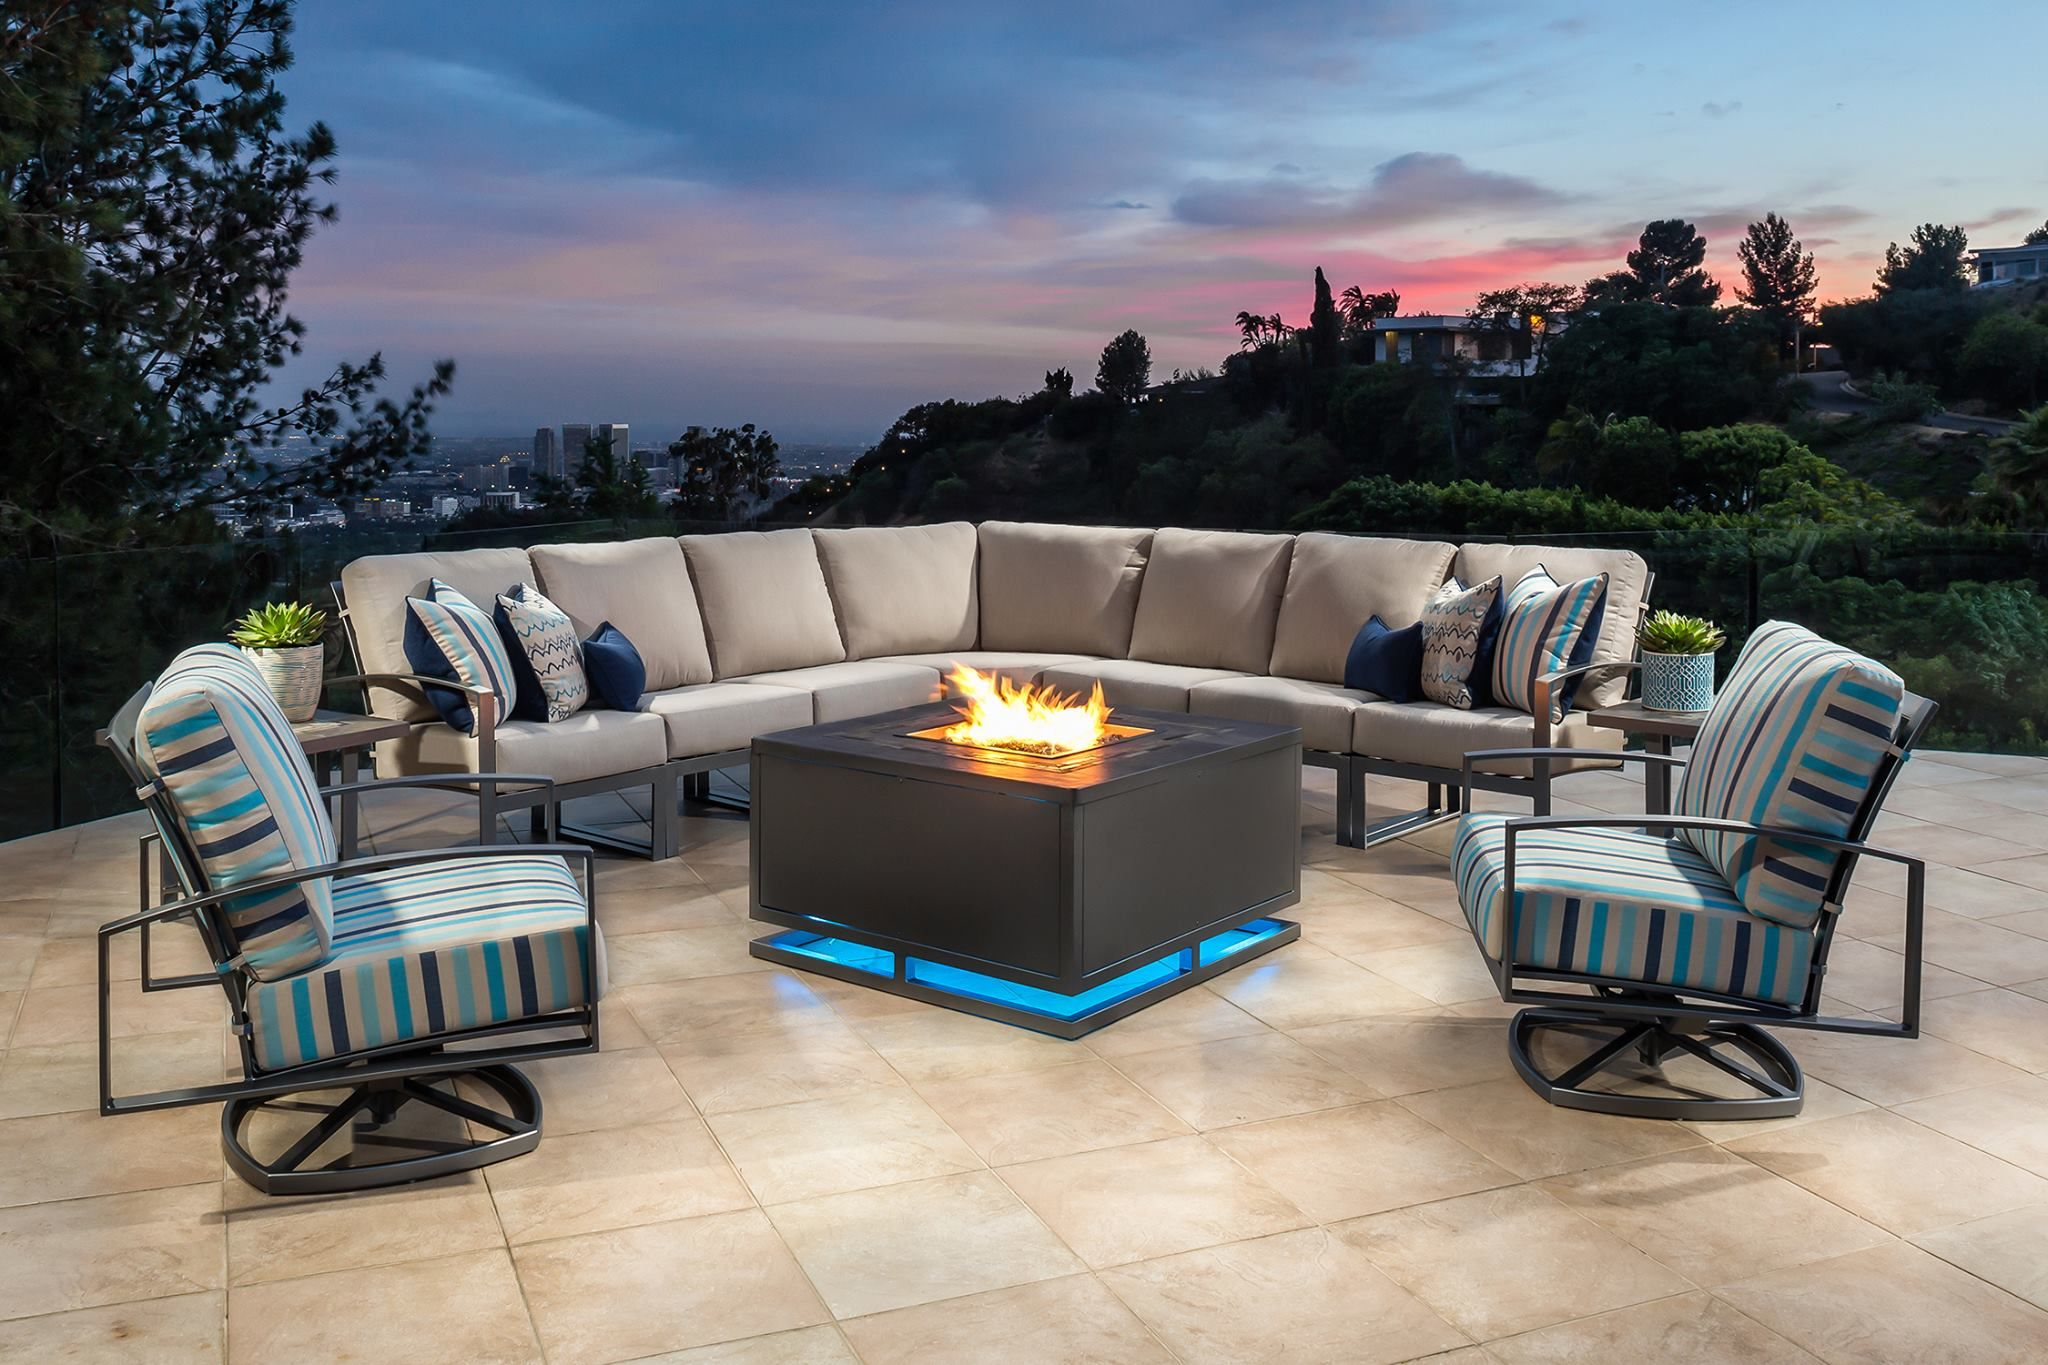 Fire Pit With Under Glow Lighting For The 2018 Outdoor Patio intended for dimensions 2048 X 1365